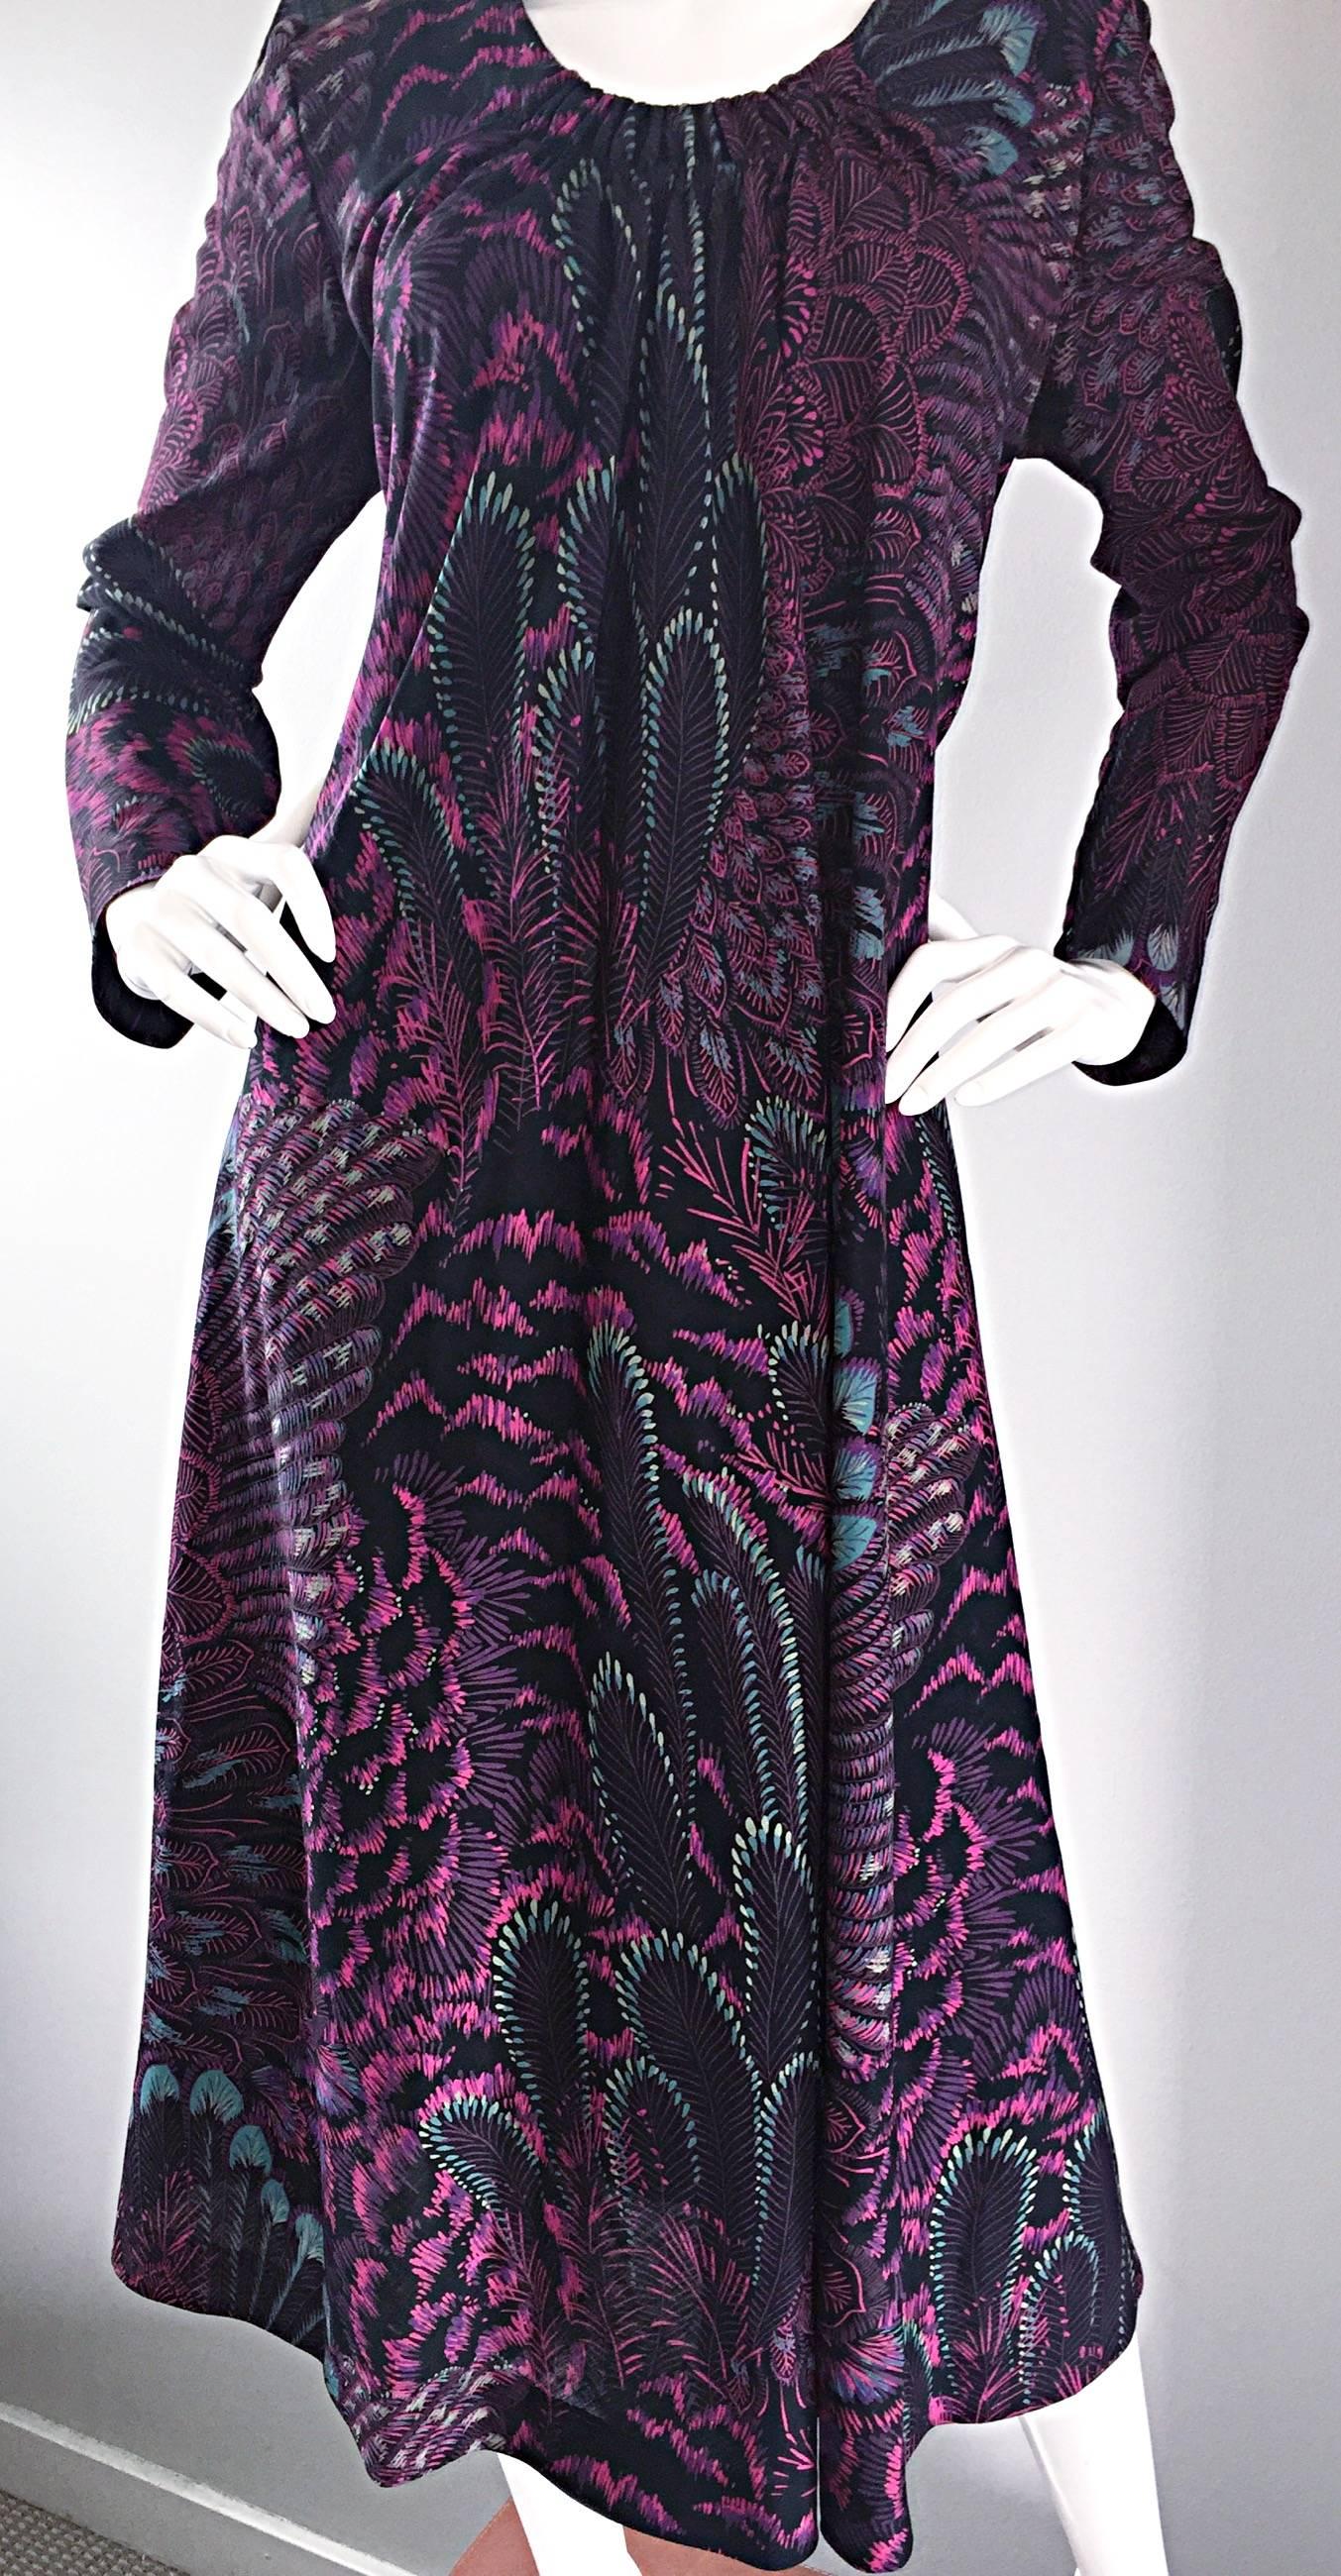 Incredible 1970s Pauline Trigere ' Peacock Feather ' Vintage Dress & Head Scarf 4